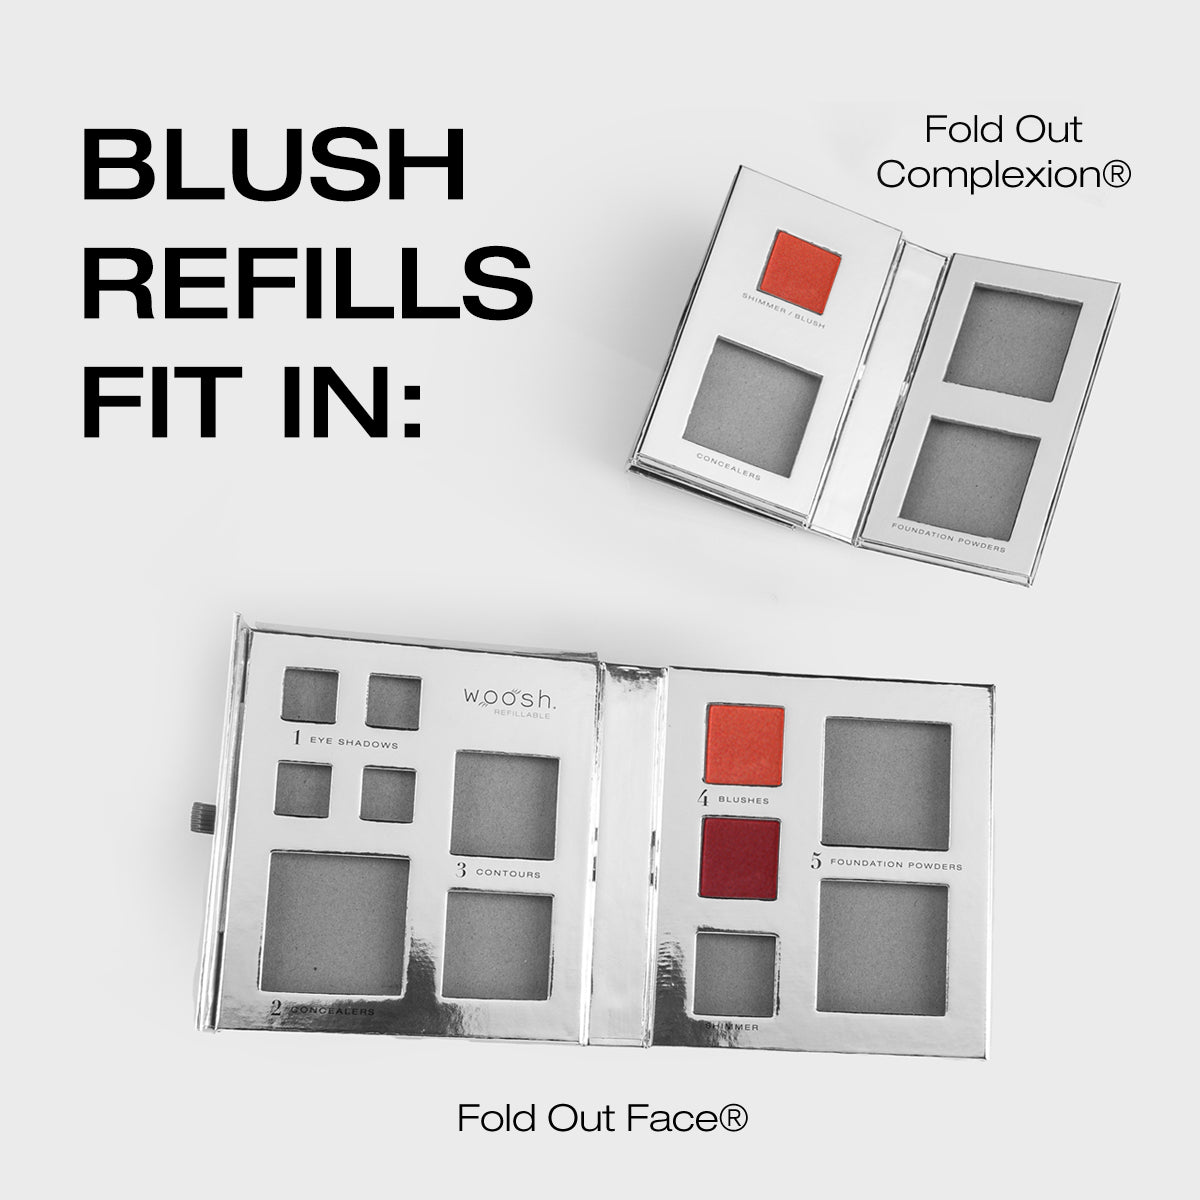 Demonstration of the blush refills fitting in the fold out complexion and fold out face